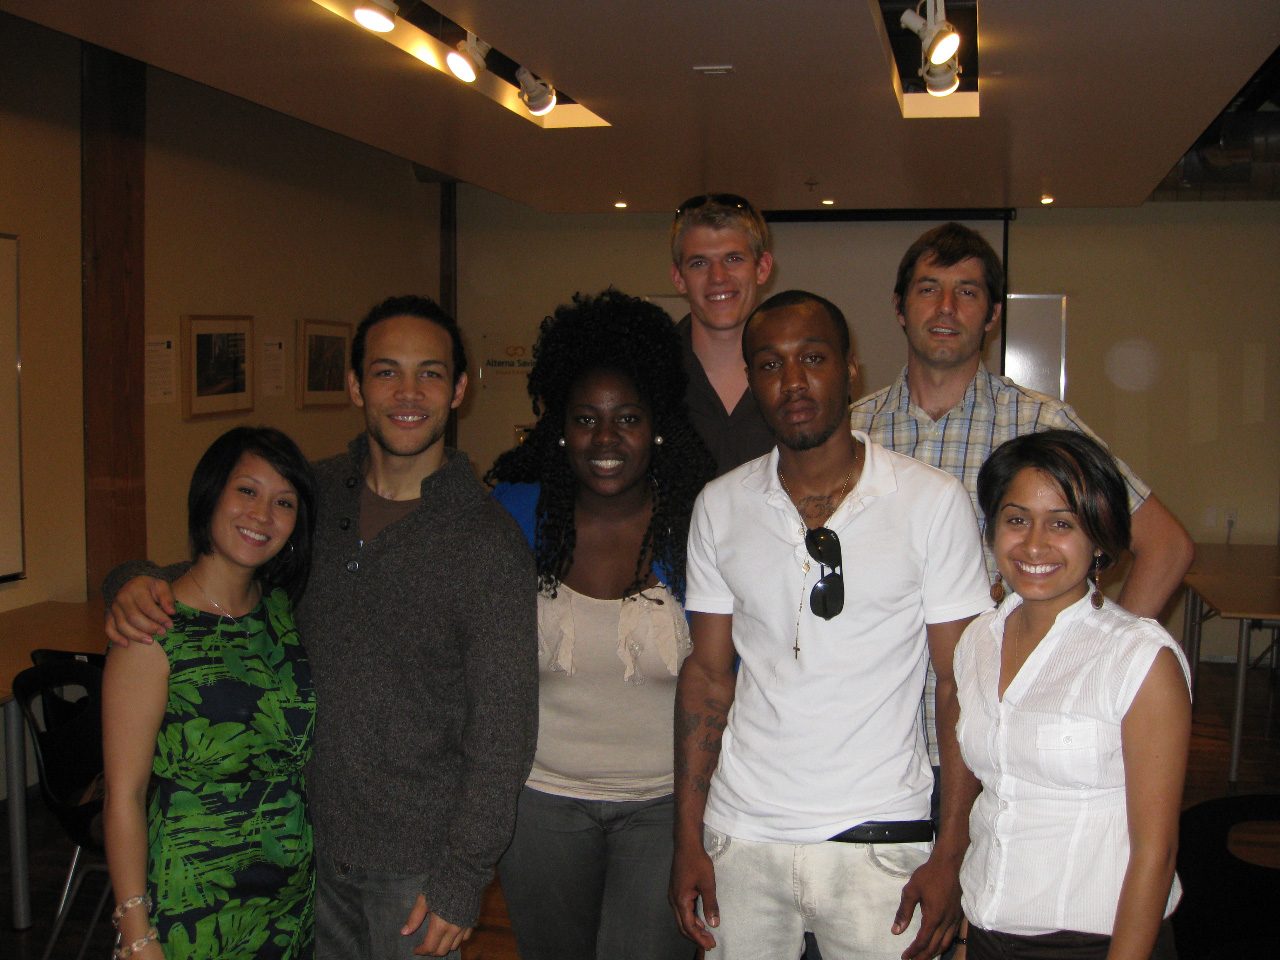 (L-R) Grace Poon, Nate Gerber, Dorothy Attakora, Ian Casterton (director of StartMeUp Ryerson), Donovan Brooks, Mike Brcic, and 